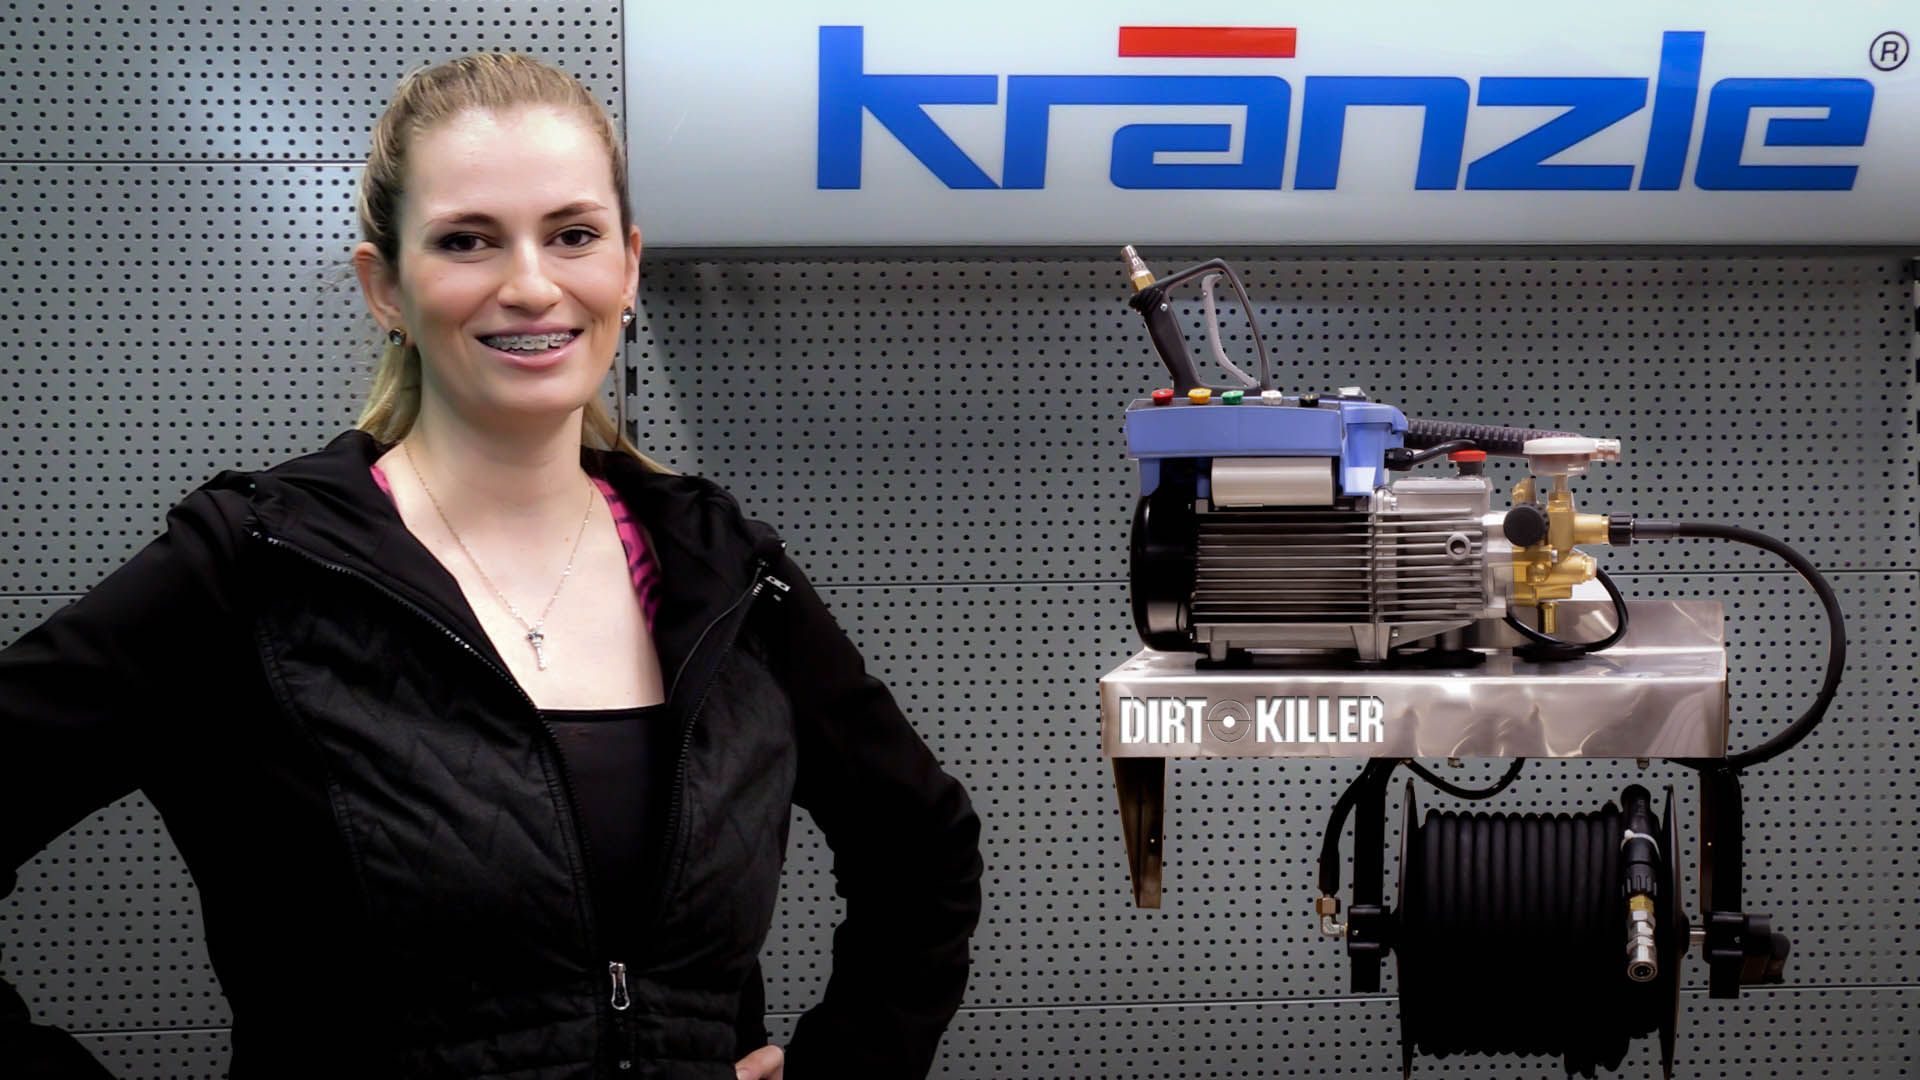 Watch video of the new Kranzle 2020 PMUSR wall mounted pressure washer with hose reel and detail kit